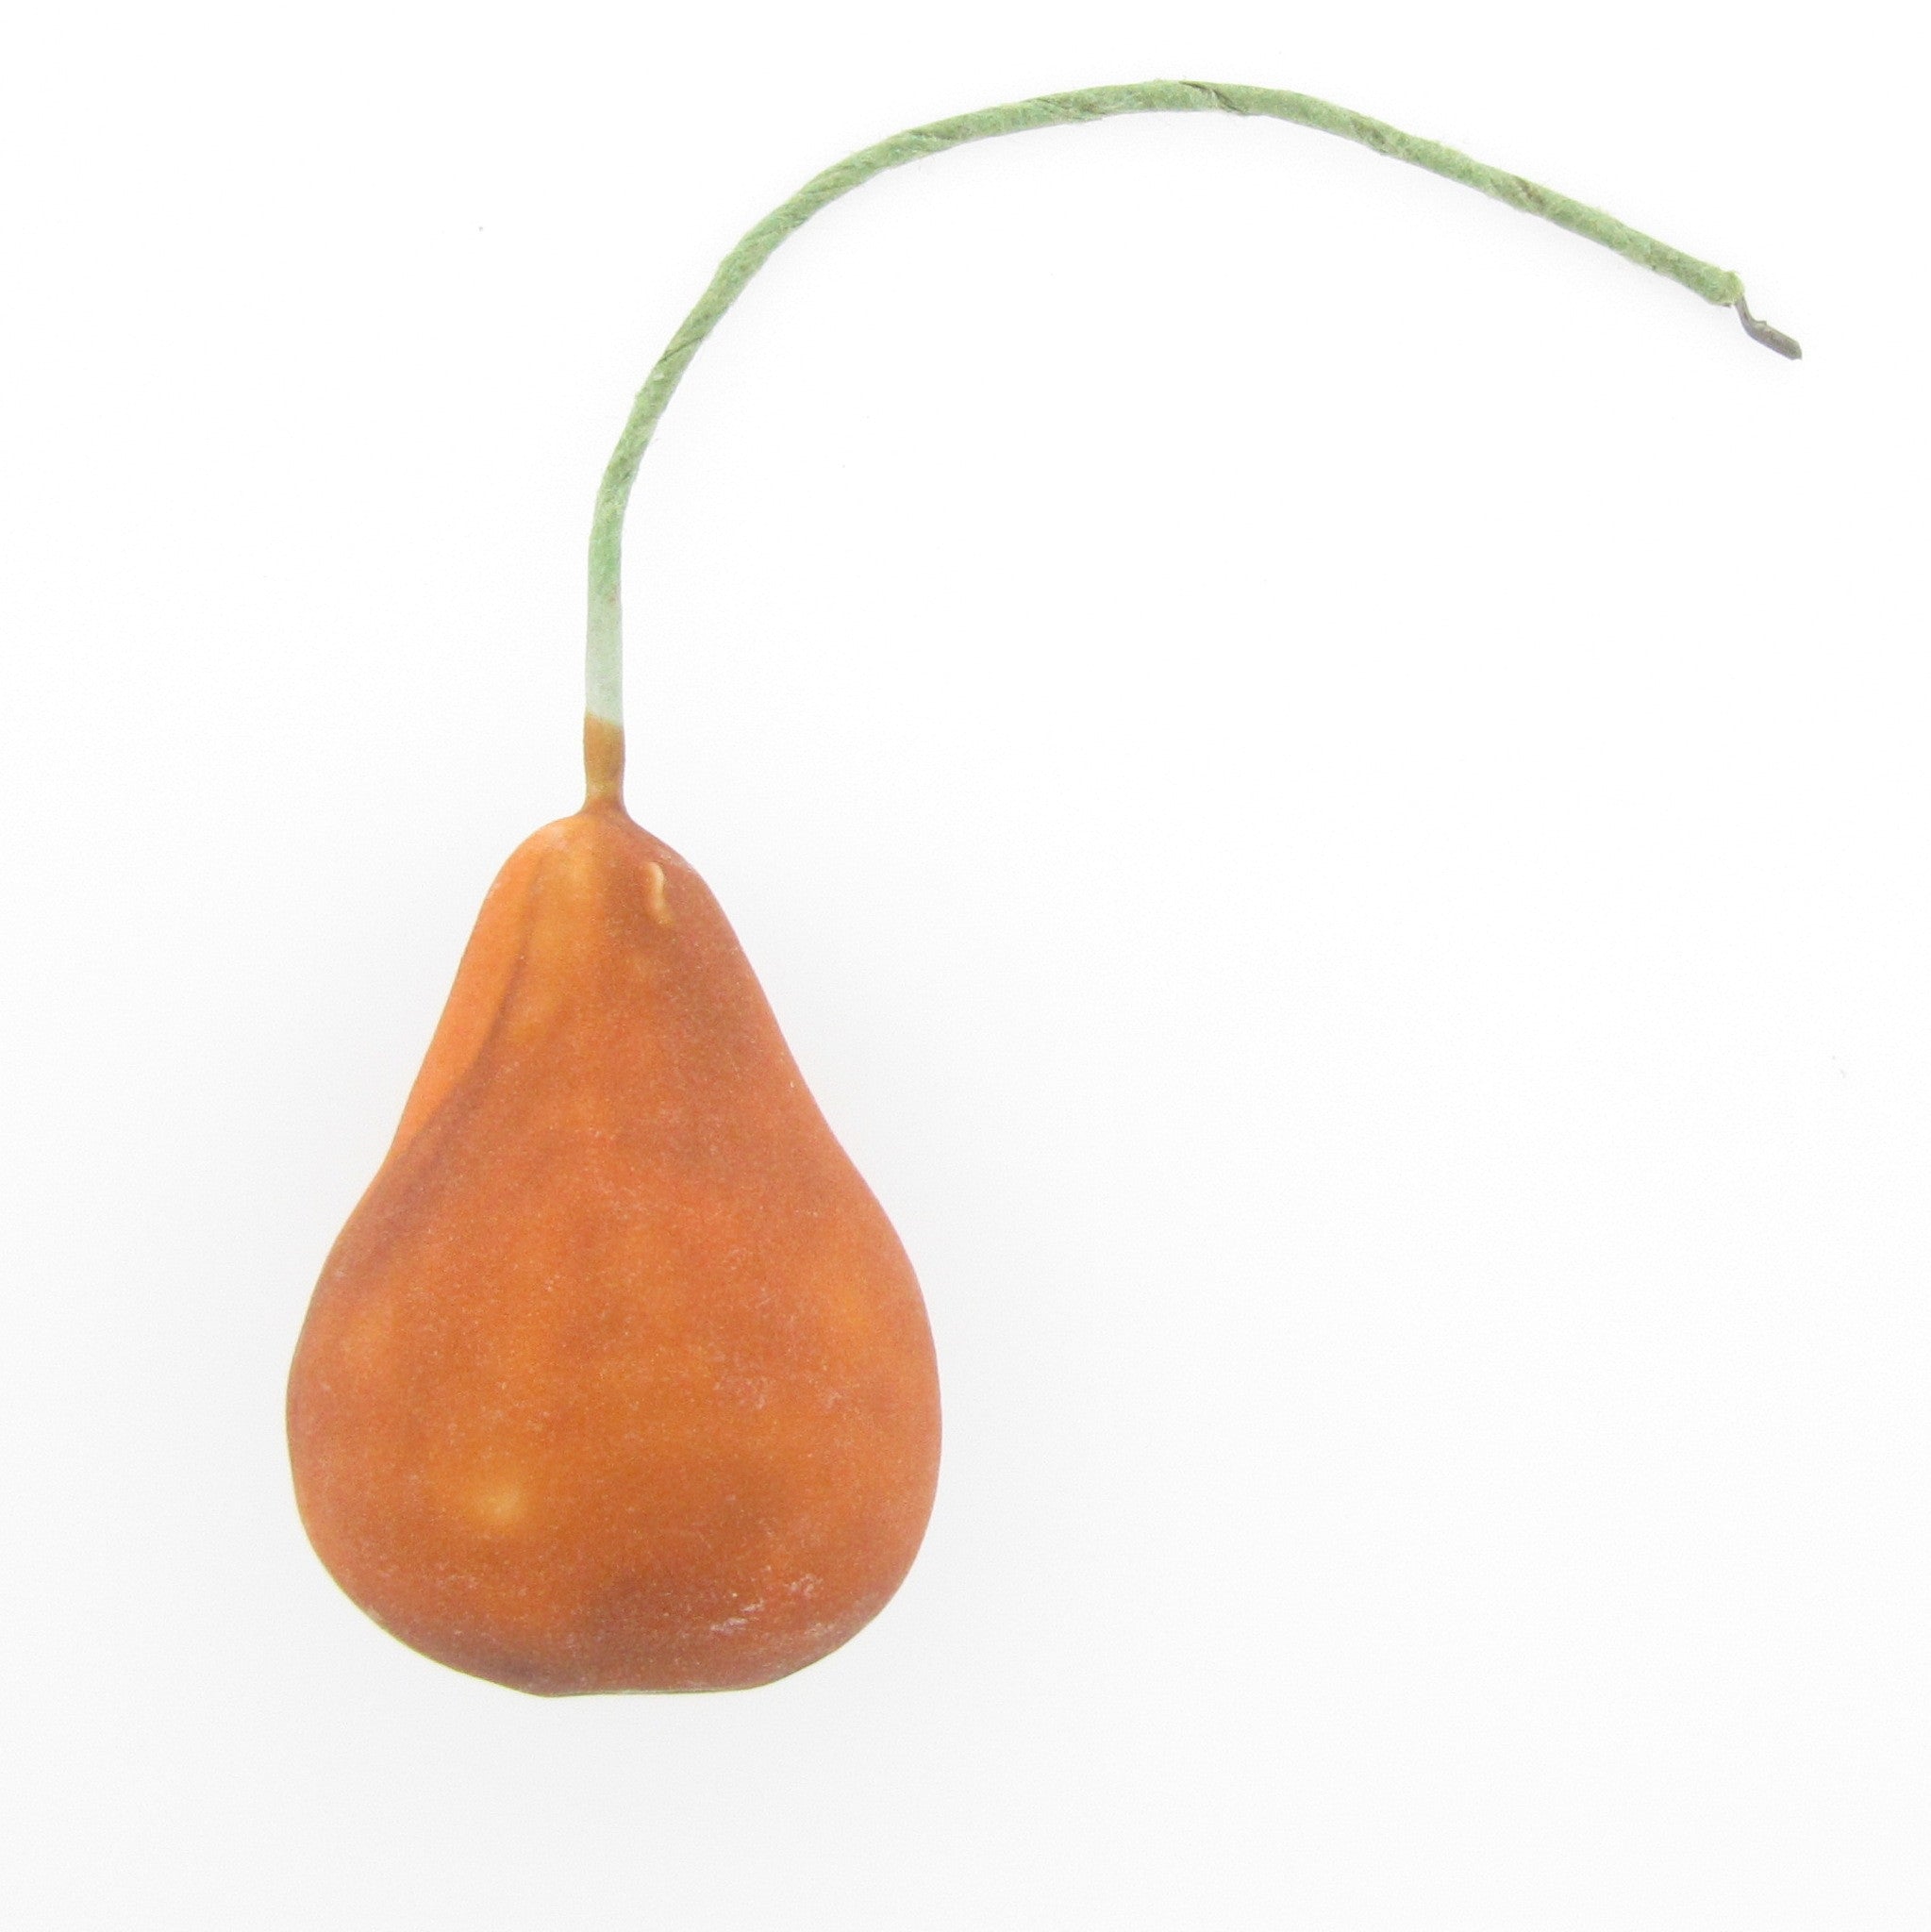 Paper Mache Pear On Wire (12 pieces)